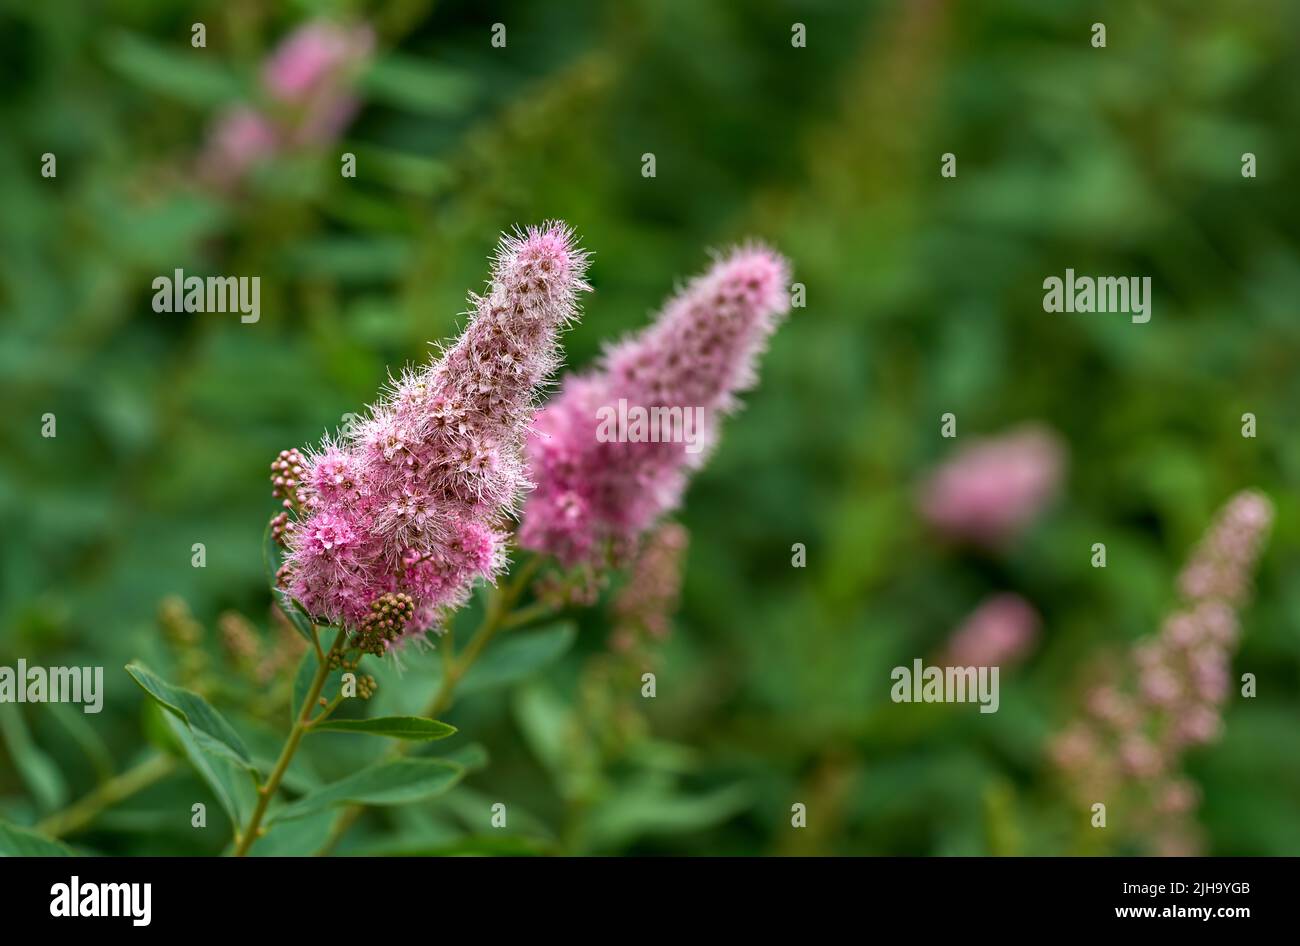 Closeup of a pink smartweed flower growing in a garden with blur background copy space. Beautiful outdoor water knotweed flowering pant with a Stock Photo